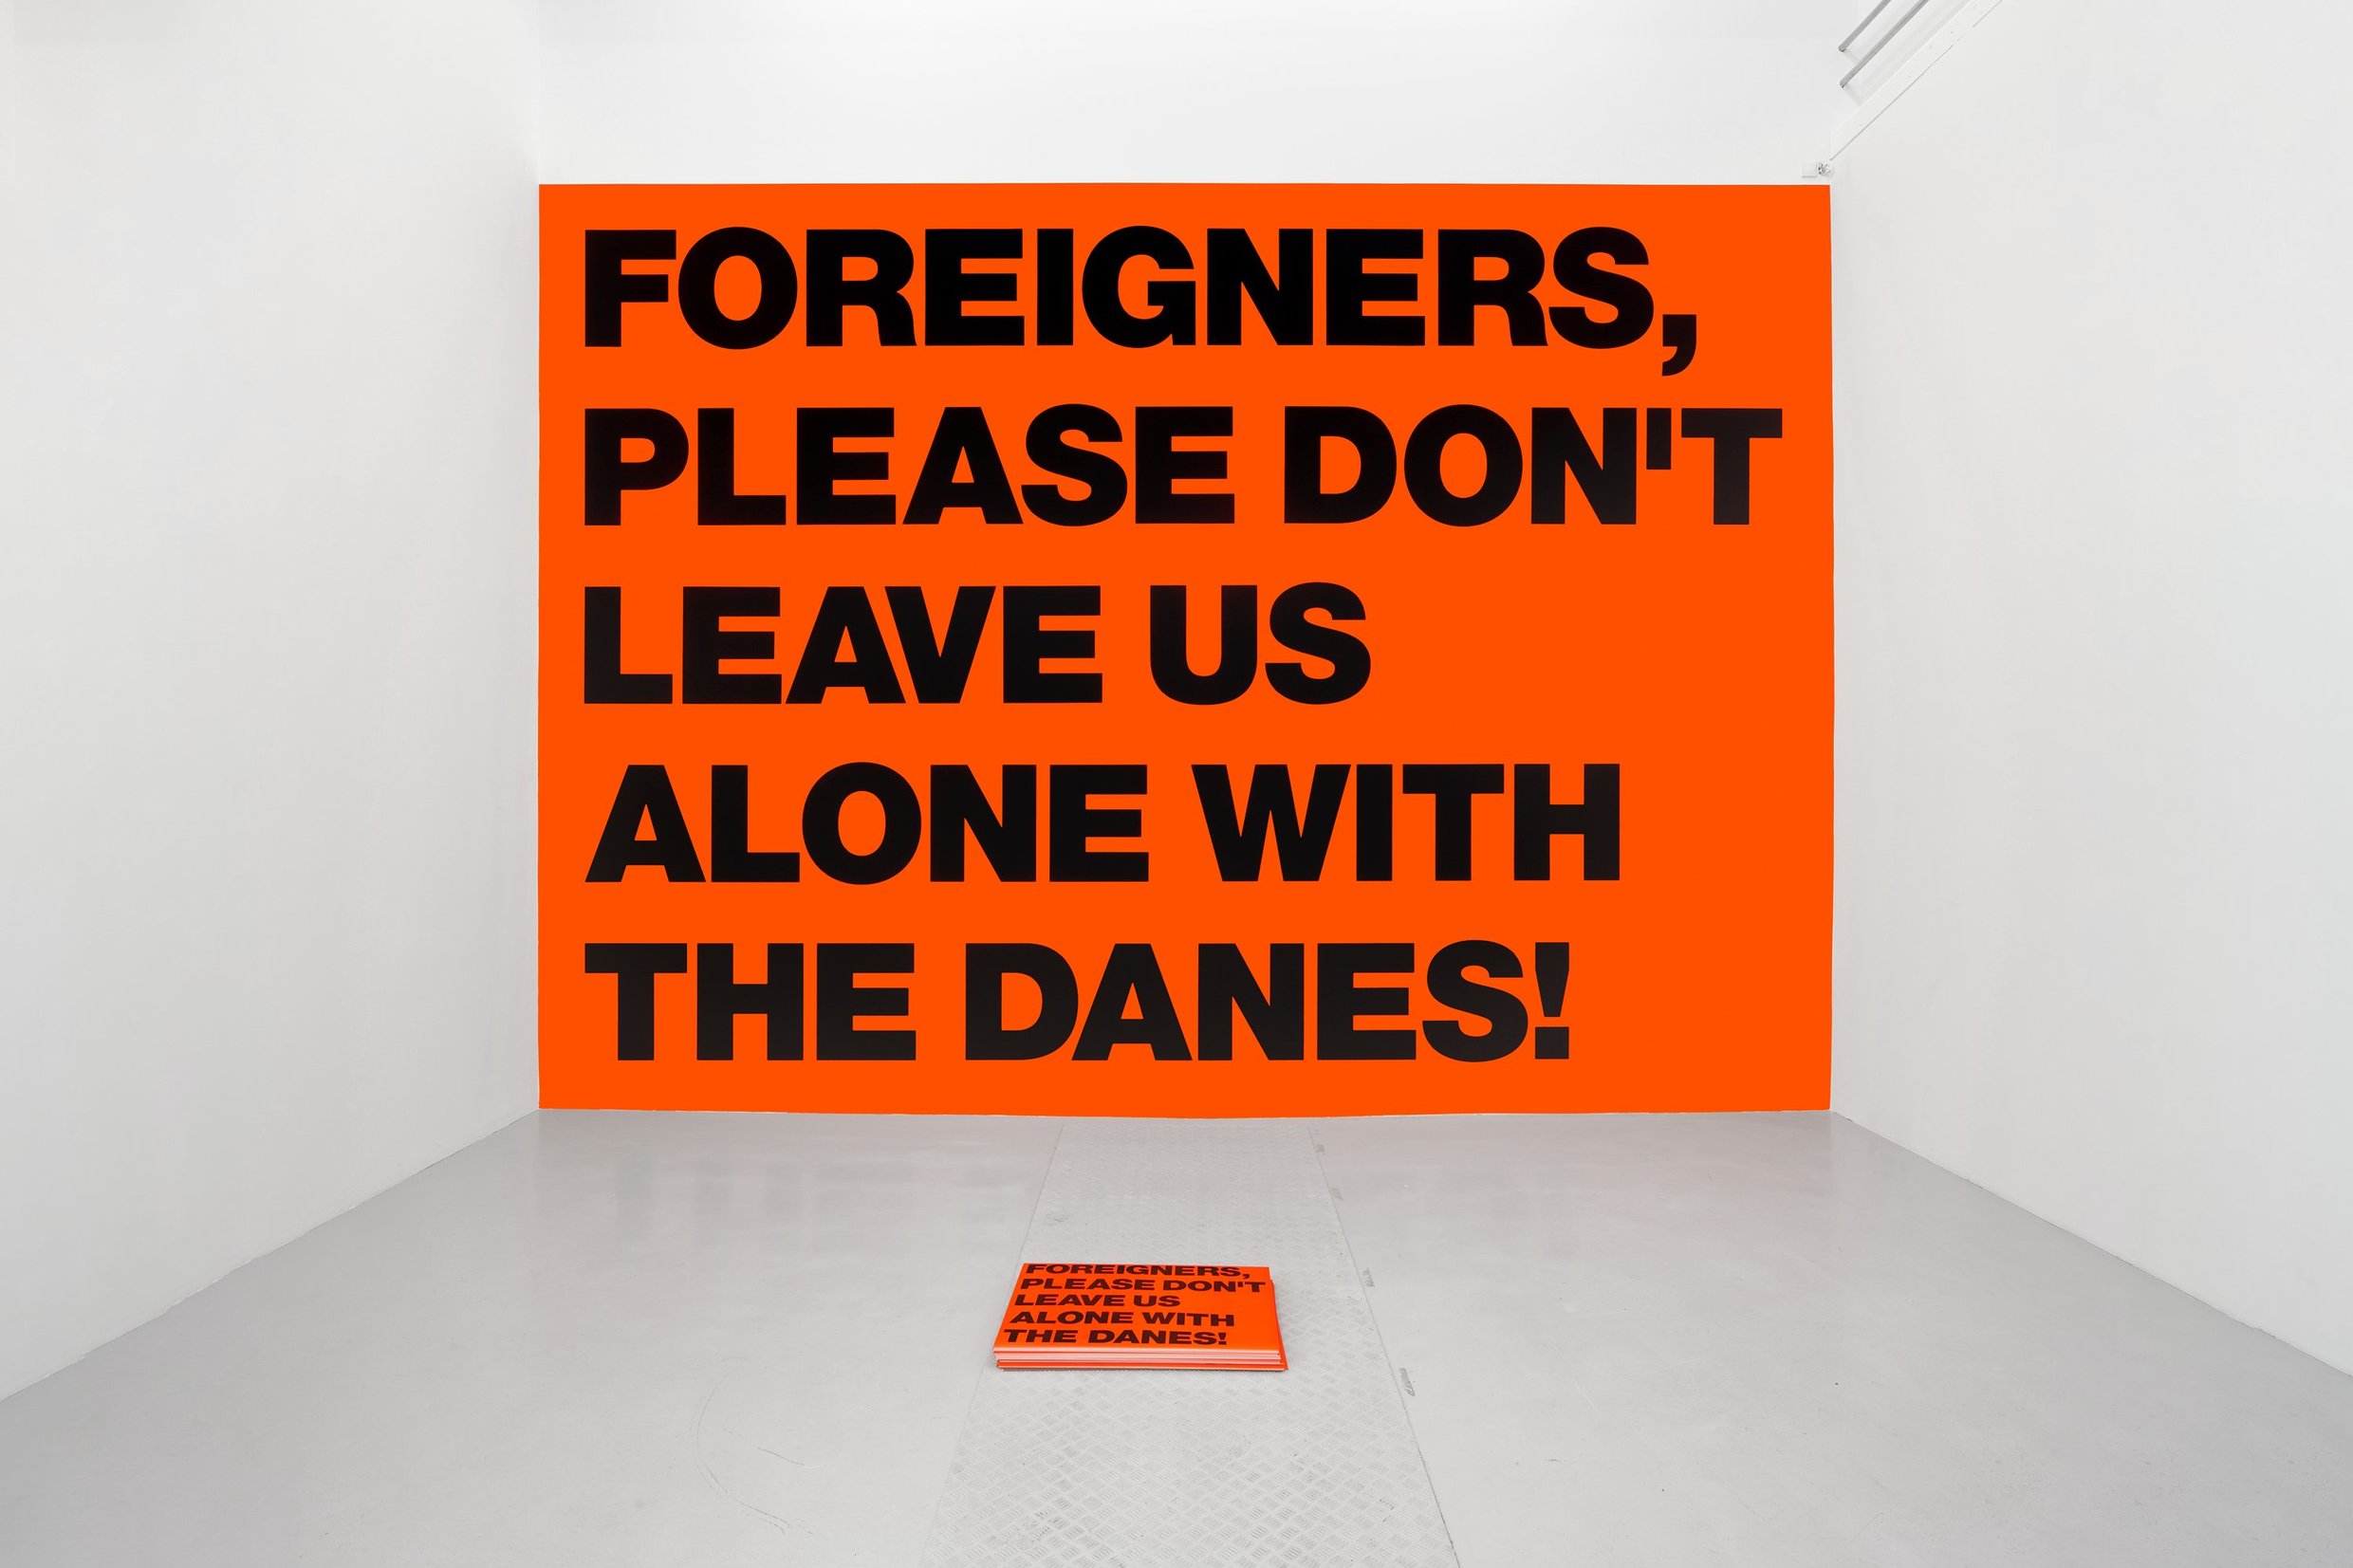 FOREIGNERS, PLEASE DON'T LEAVE ALONE WITH THE DANES! –